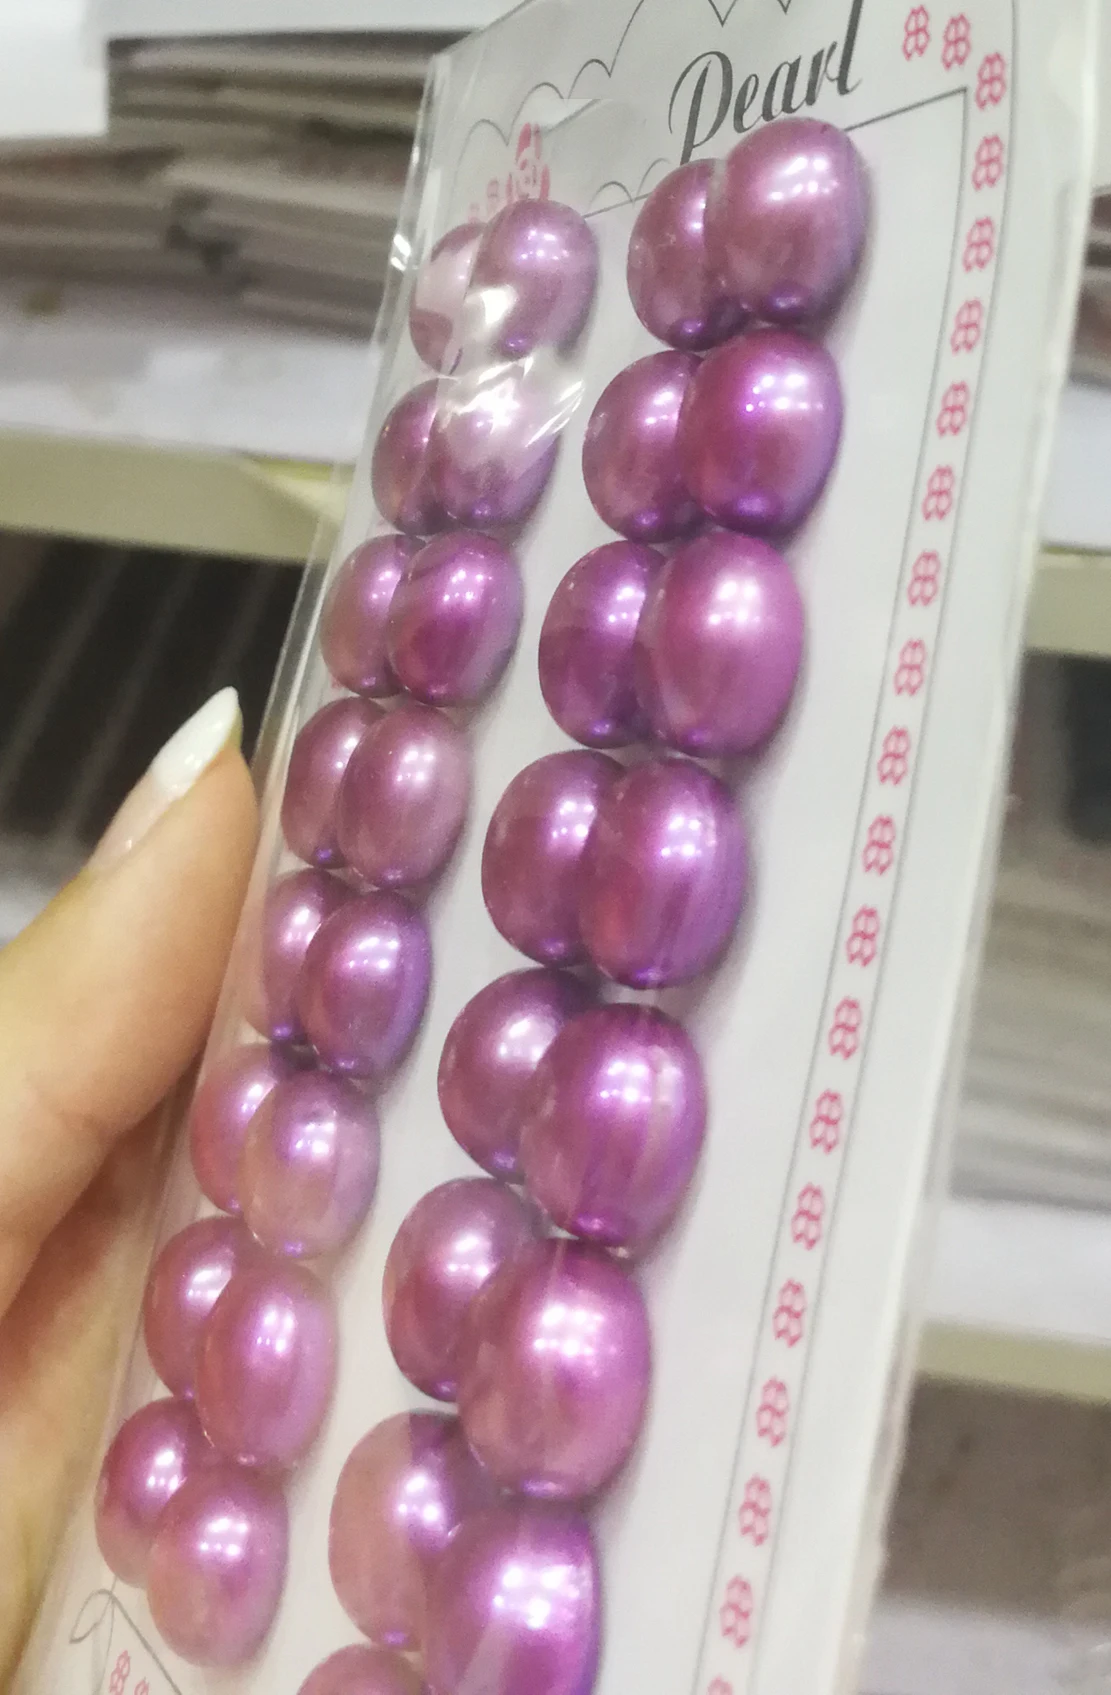 

32Pcs deep purple pearls 11-12mm Pearl Plum Half Hole Drilled Pearl Super Luster Button Natural Freshwater pearl Loose Beads